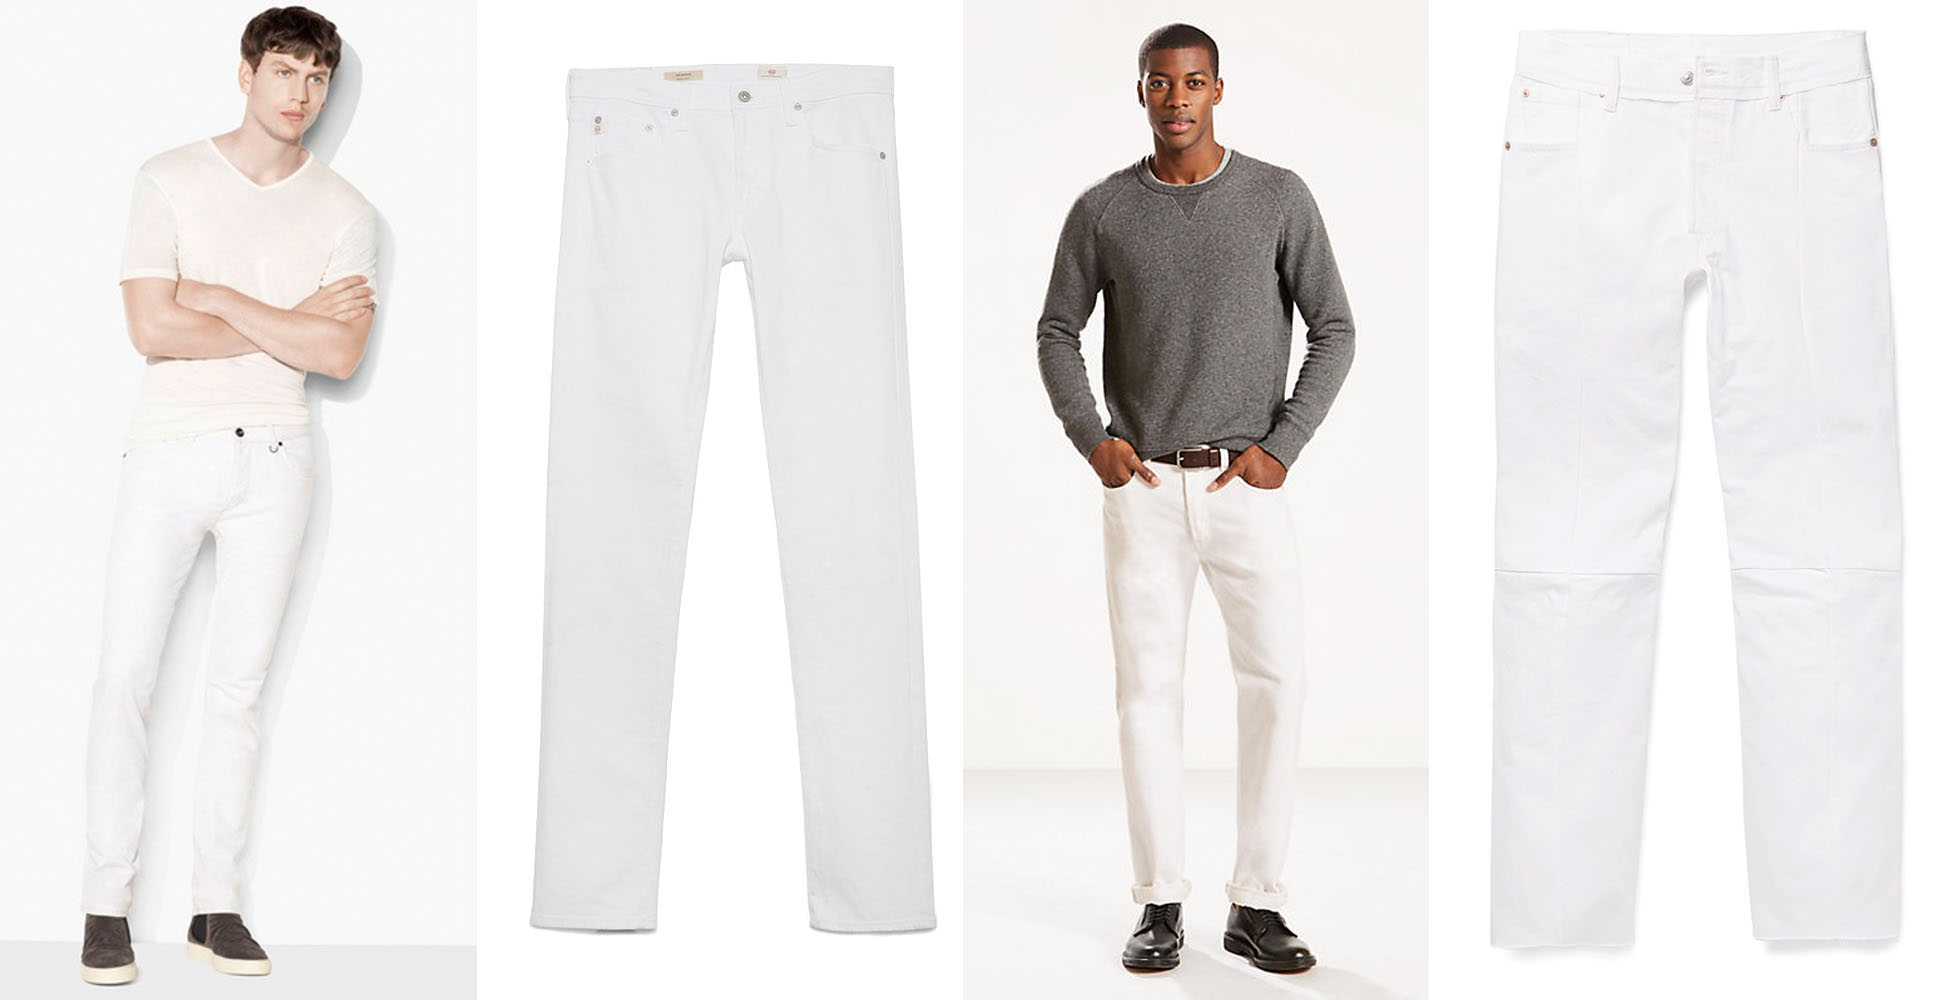 Men's Fashion Hub - When it's summer and you're wearing white pants that  are sort of see-through, what do you wear for underwear?